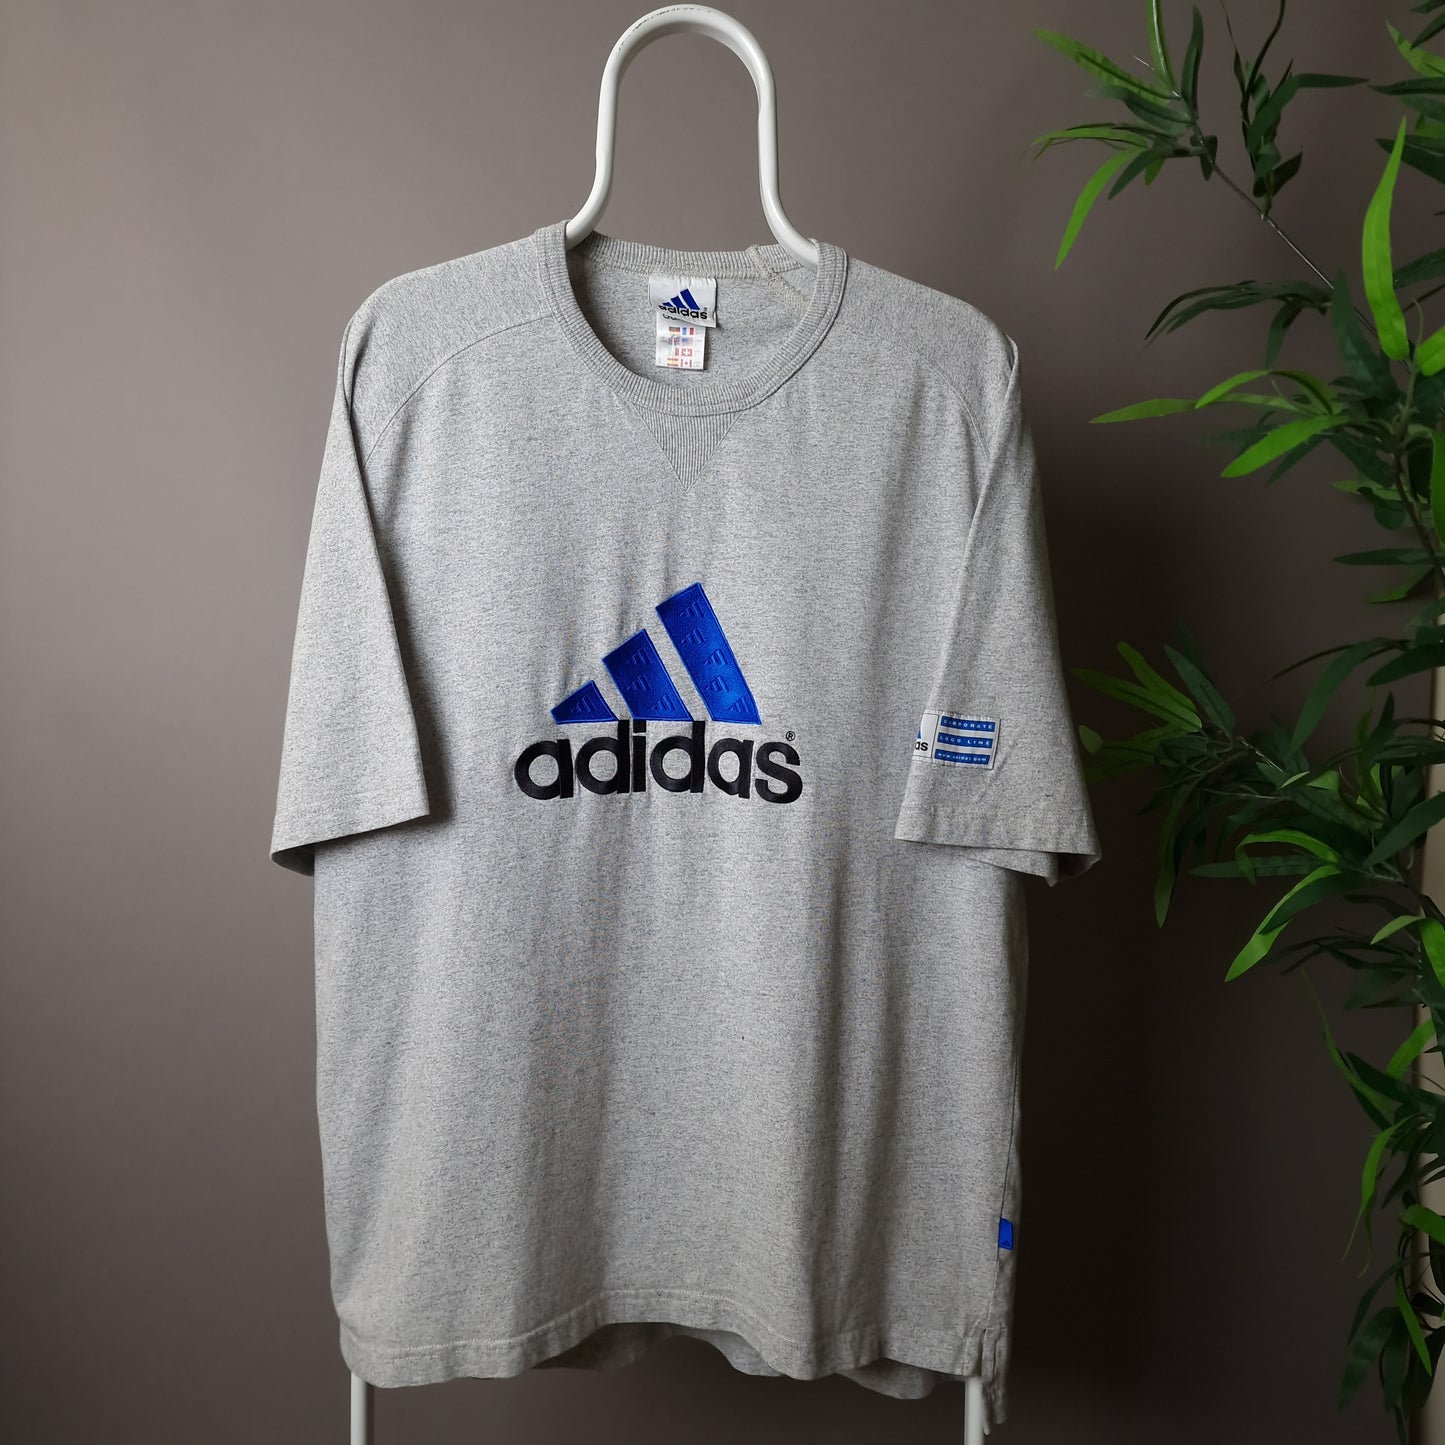 Vintage Adidas t-shirt in grey and blue - large